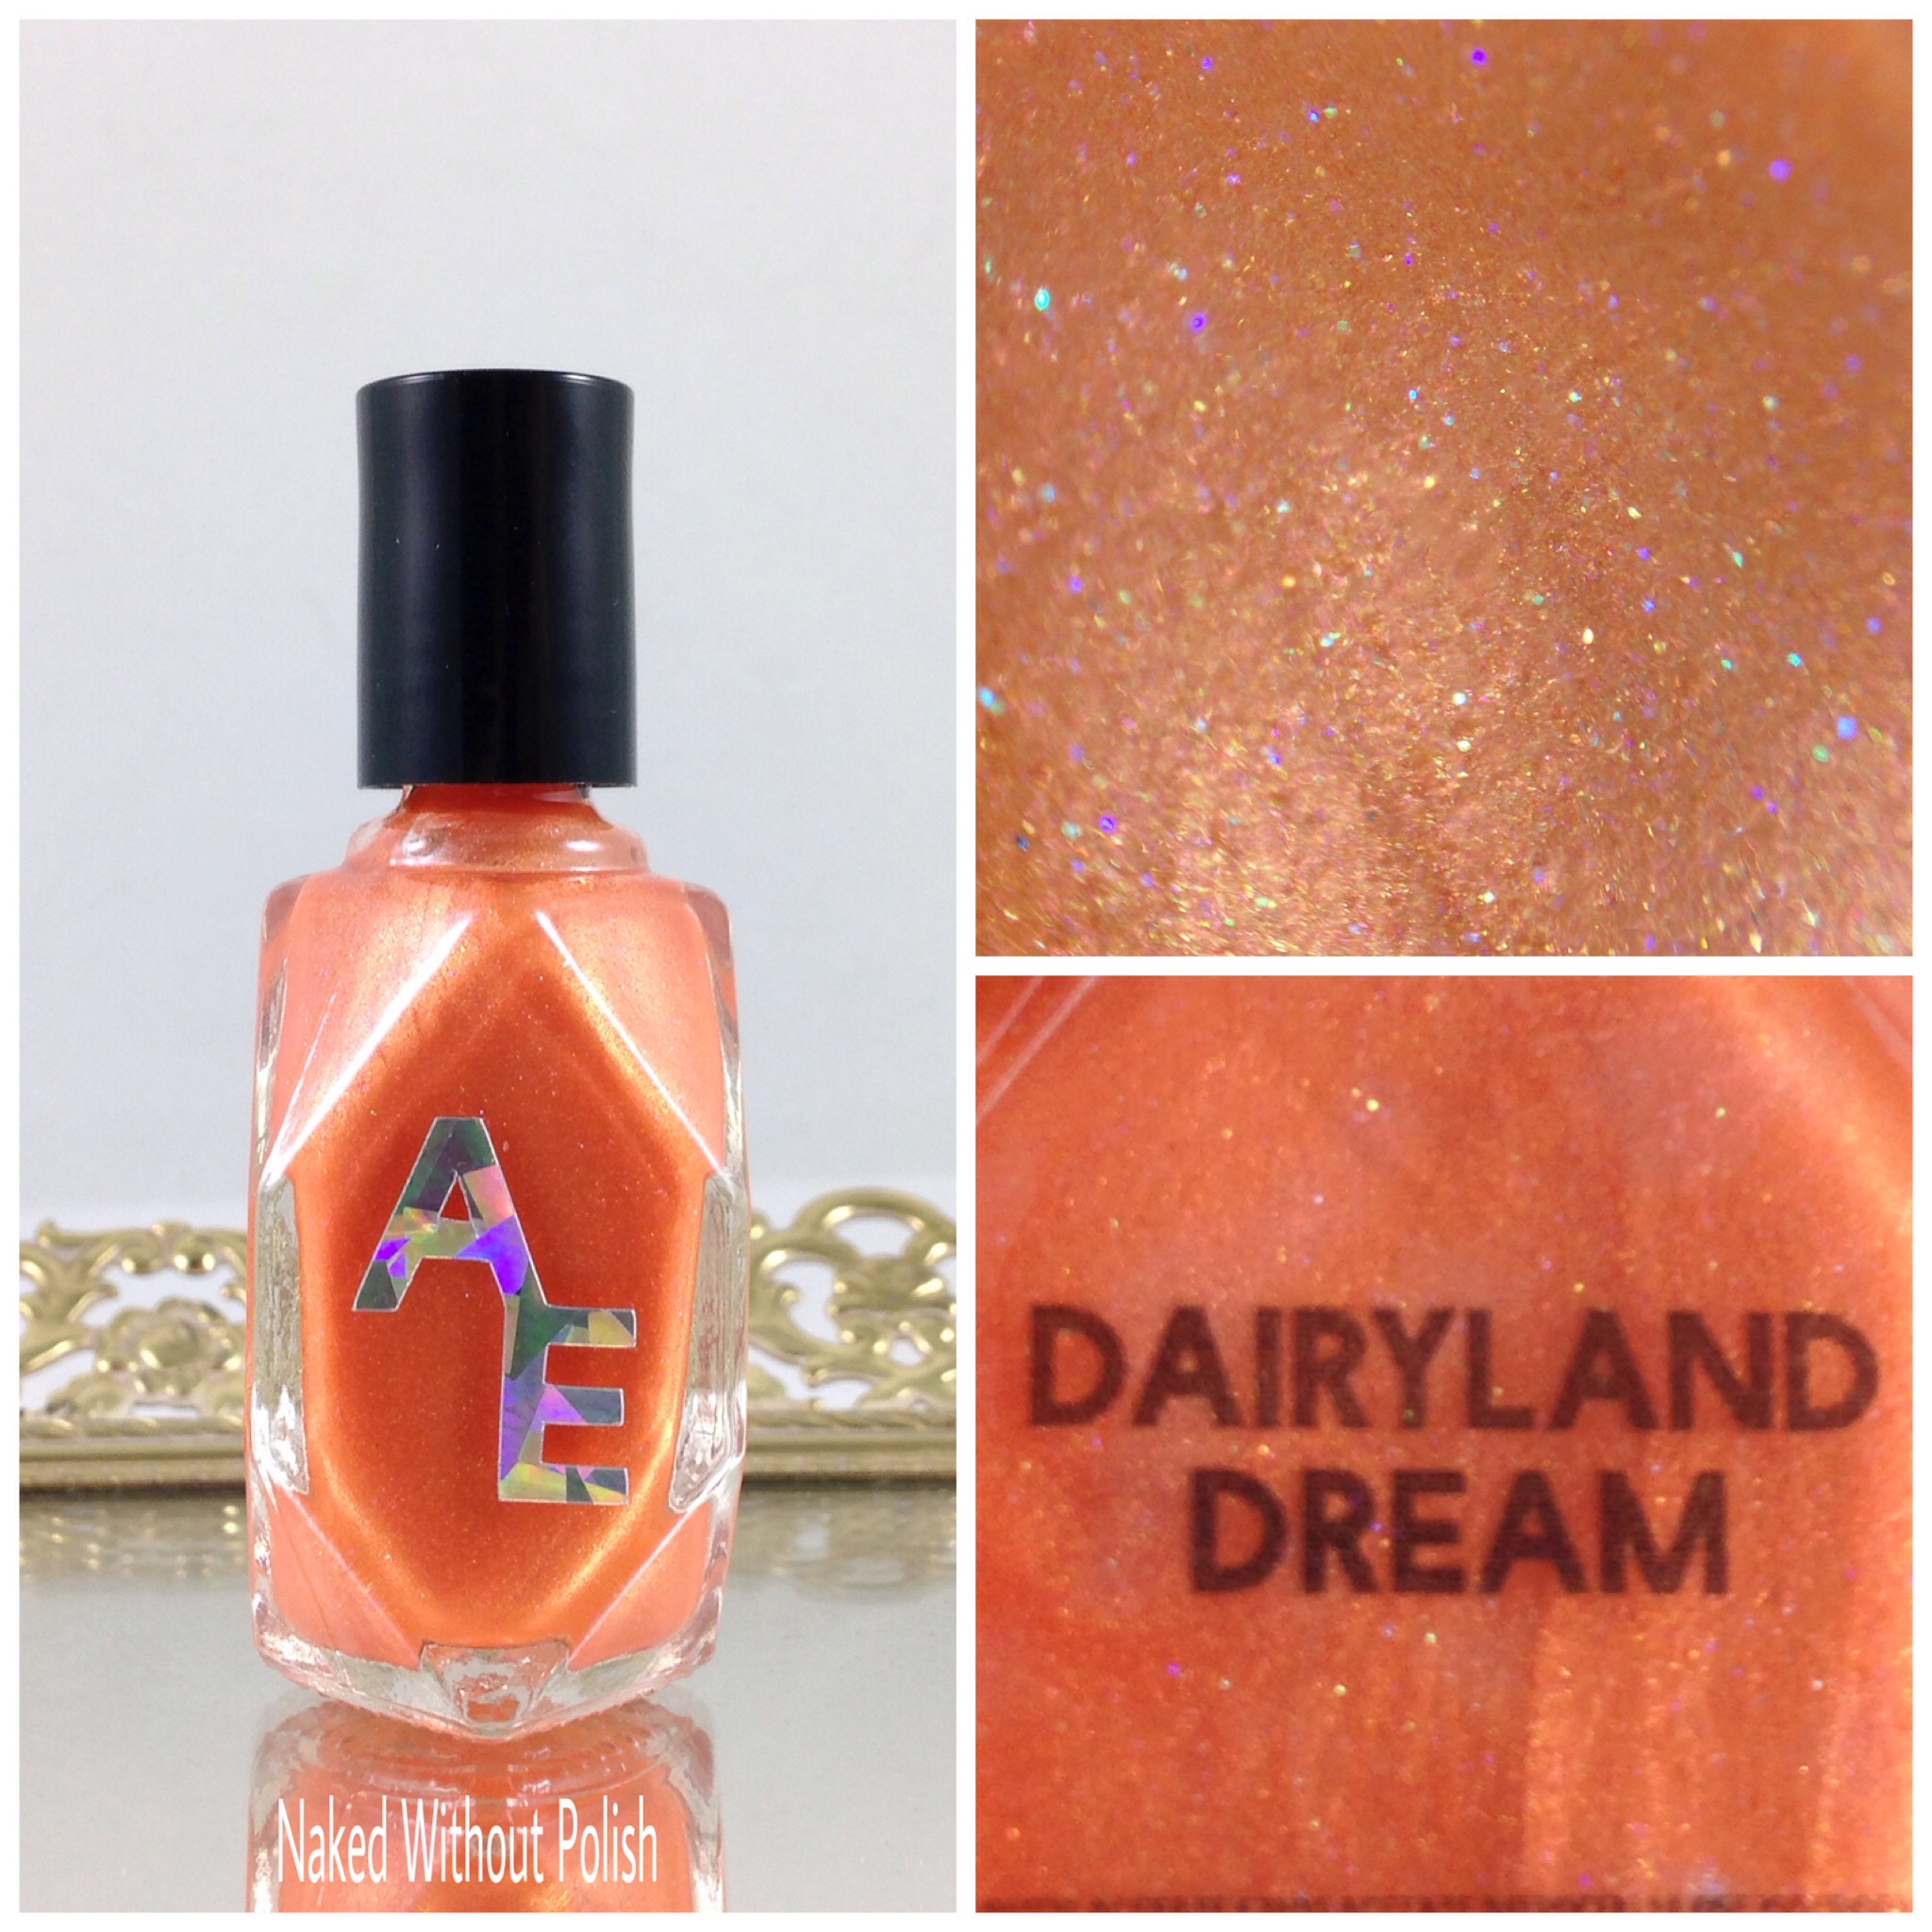 Candy-Box-Alter-Ego-Body-Care-Products-Dairyland-Dream-1